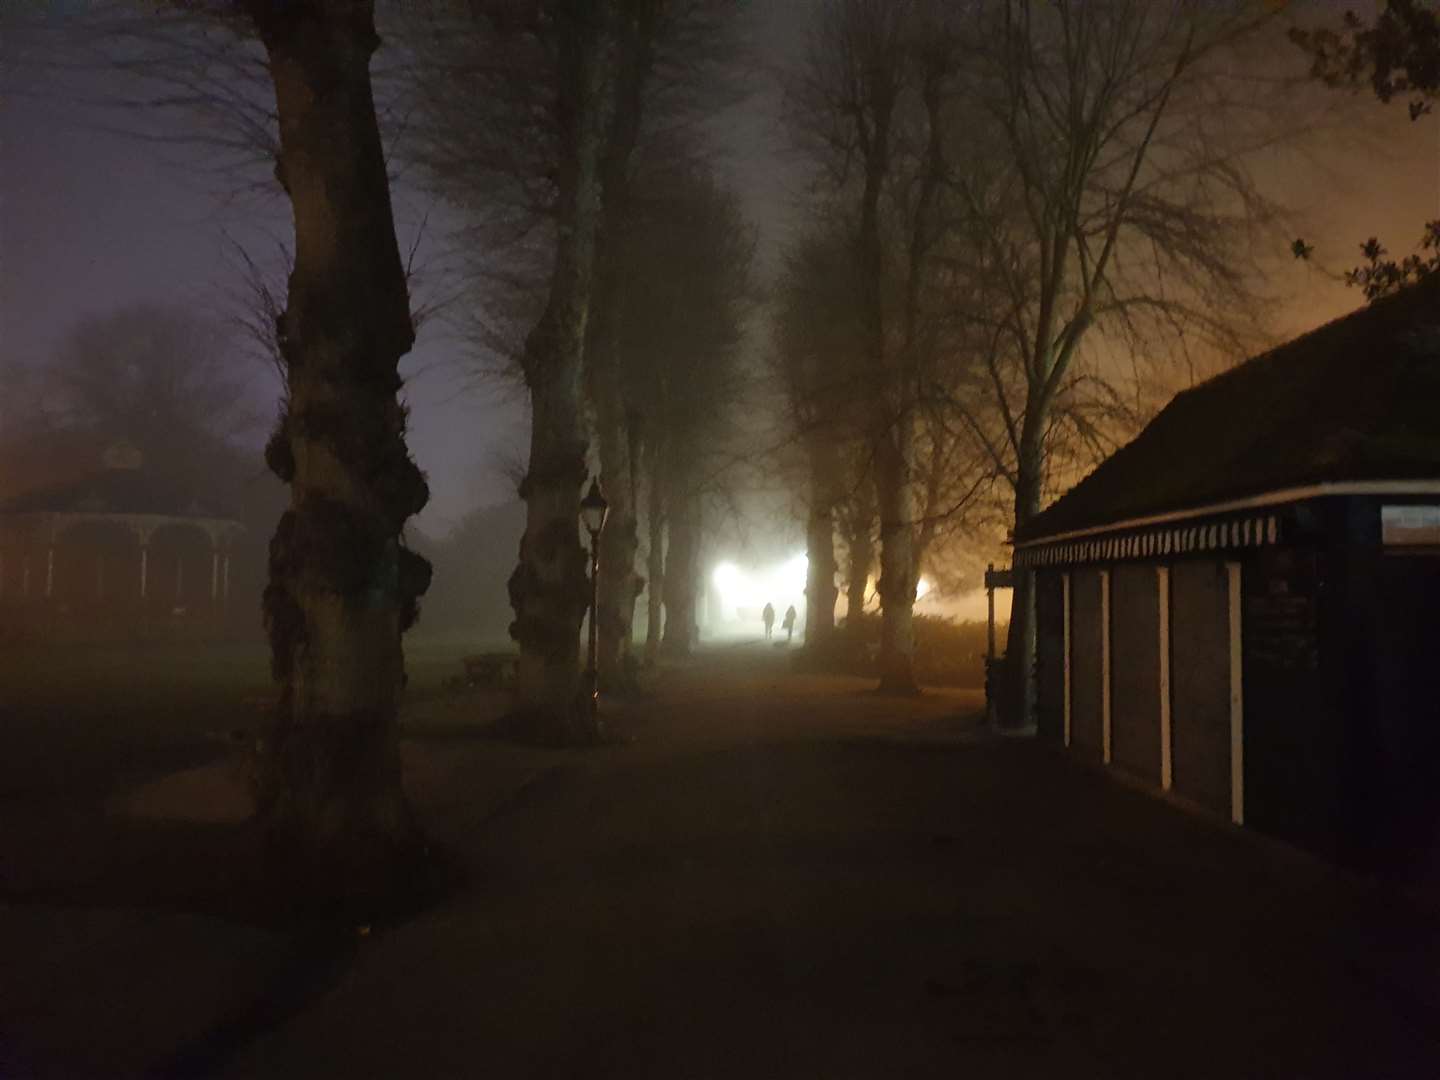 The Dane John Gardens in Canterbury has been branded a 'no-go zone' at night